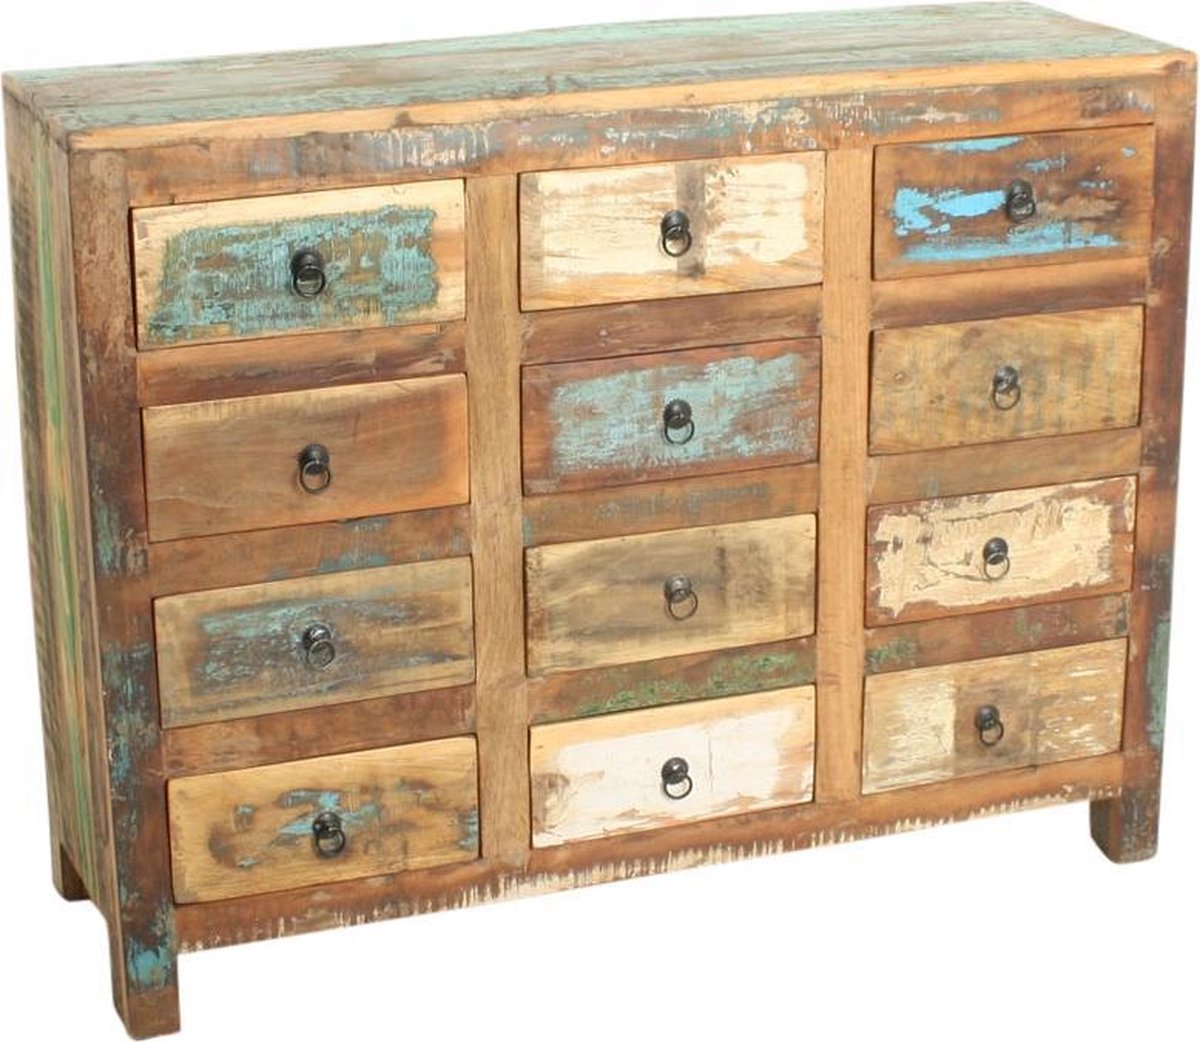 One World Interiors Scrapwood Ladenkast - Commode - 12 lades - Gerecycled  hout | bol.com